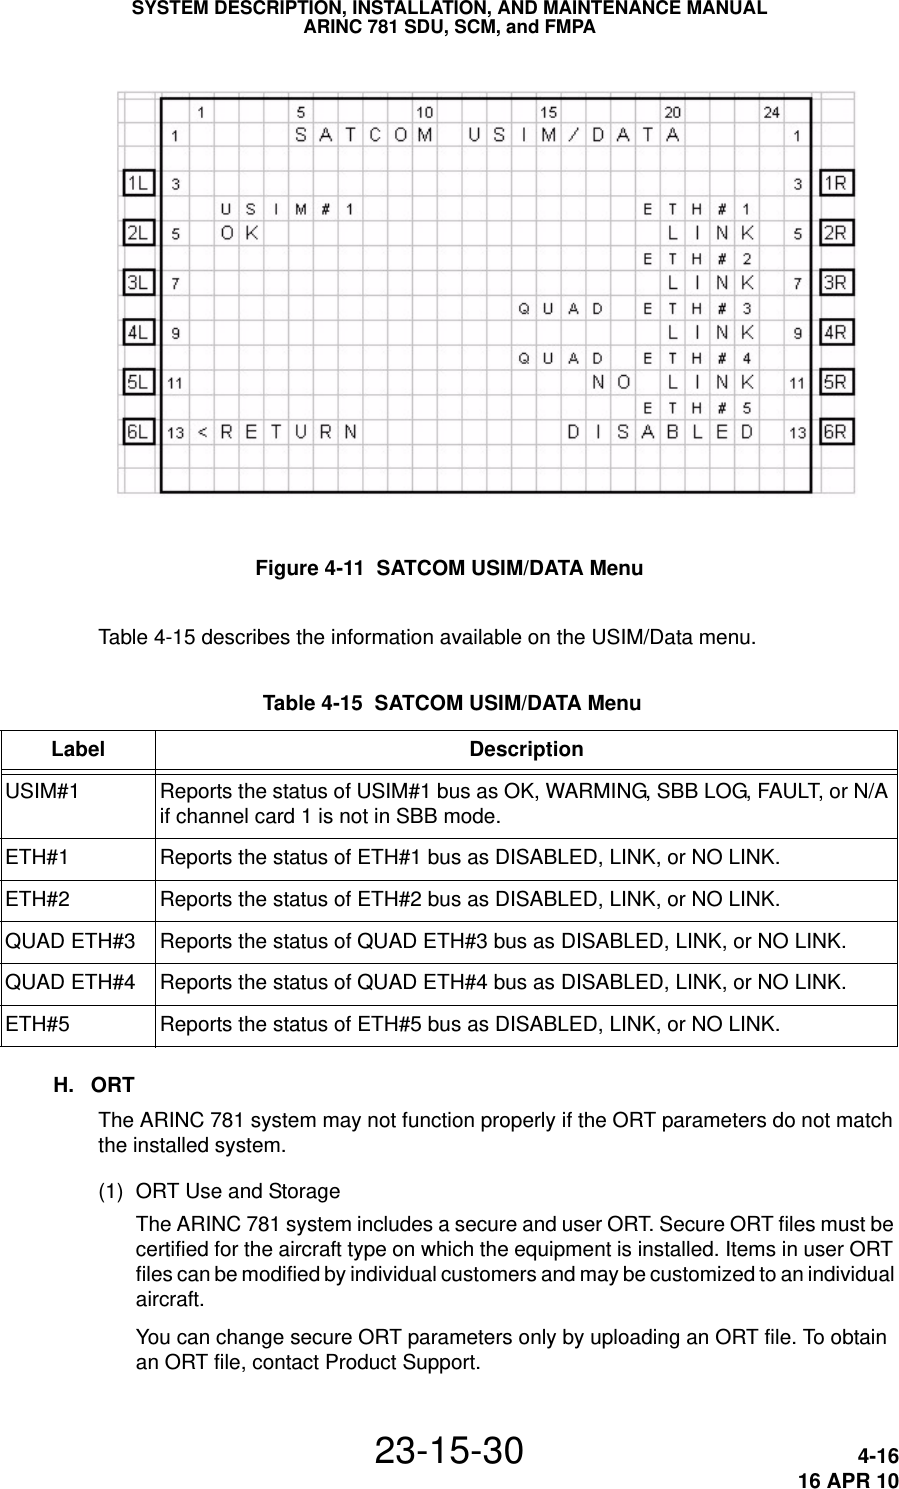 SYSTEM DESCRIPTION, INSTALLATION, AND MAINTENANCE MANUALARINC 781 SDU, SCM, and FMPA23-15-30 4-1616 APR 10 Figure 4-11  SATCOM USIM/DATA MenuTable 4-15 describes the information available on the USIM/Data menu.H. ORTThe ARINC 781 system may not function properly if the ORT parameters do not match the installed system.(1) ORT Use and StorageThe ARINC 781 system includes a secure and user ORT. Secure ORT files must be certified for the aircraft type on which the equipment is installed. Items in user ORT files can be modified by individual customers and may be customized to an individual aircraft.You can change secure ORT parameters only by uploading an ORT file. To obtain an ORT file, contact Product Support. Table 4-15  SATCOM USIM/DATA Menu Label DescriptionUSIM#1 Reports the status of USIM#1 bus as OK, WARMING, SBB LOG, FAULT, or N/A if channel card 1 is not in SBB mode.ETH#1 Reports the status of ETH#1 bus as DISABLED, LINK, or NO LINK.ETH#2 Reports the status of ETH#2 bus as DISABLED, LINK, or NO LINK.QUAD ETH#3 Reports the status of QUAD ETH#3 bus as DISABLED, LINK, or NO LINK.QUAD ETH#4 Reports the status of QUAD ETH#4 bus as DISABLED, LINK, or NO LINK.ETH#5 Reports the status of ETH#5 bus as DISABLED, LINK, or NO LINK.